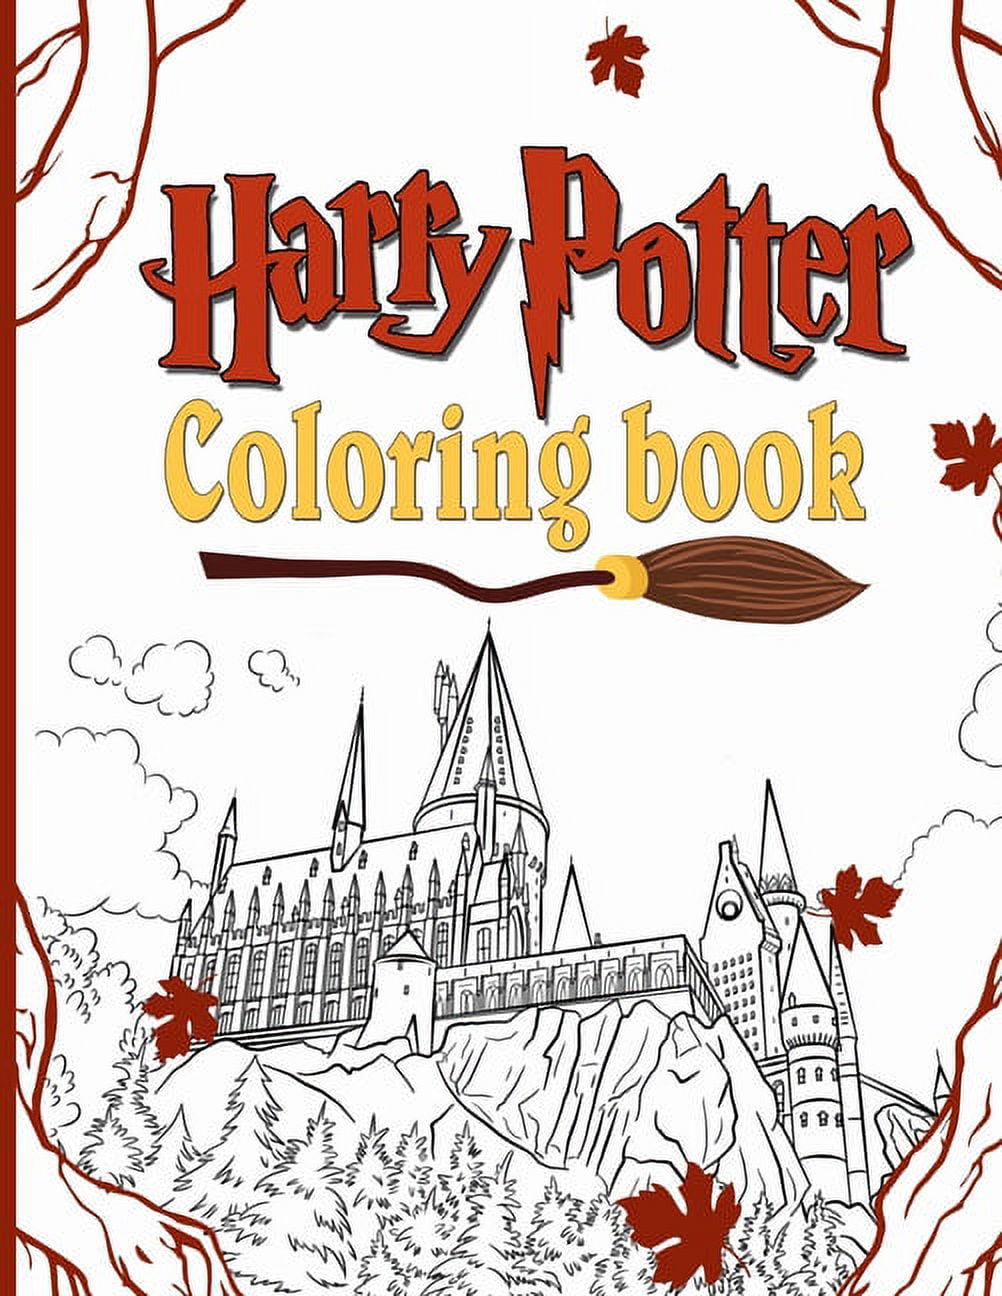 Harry Potter Coloring Book and Harry Potter Markers